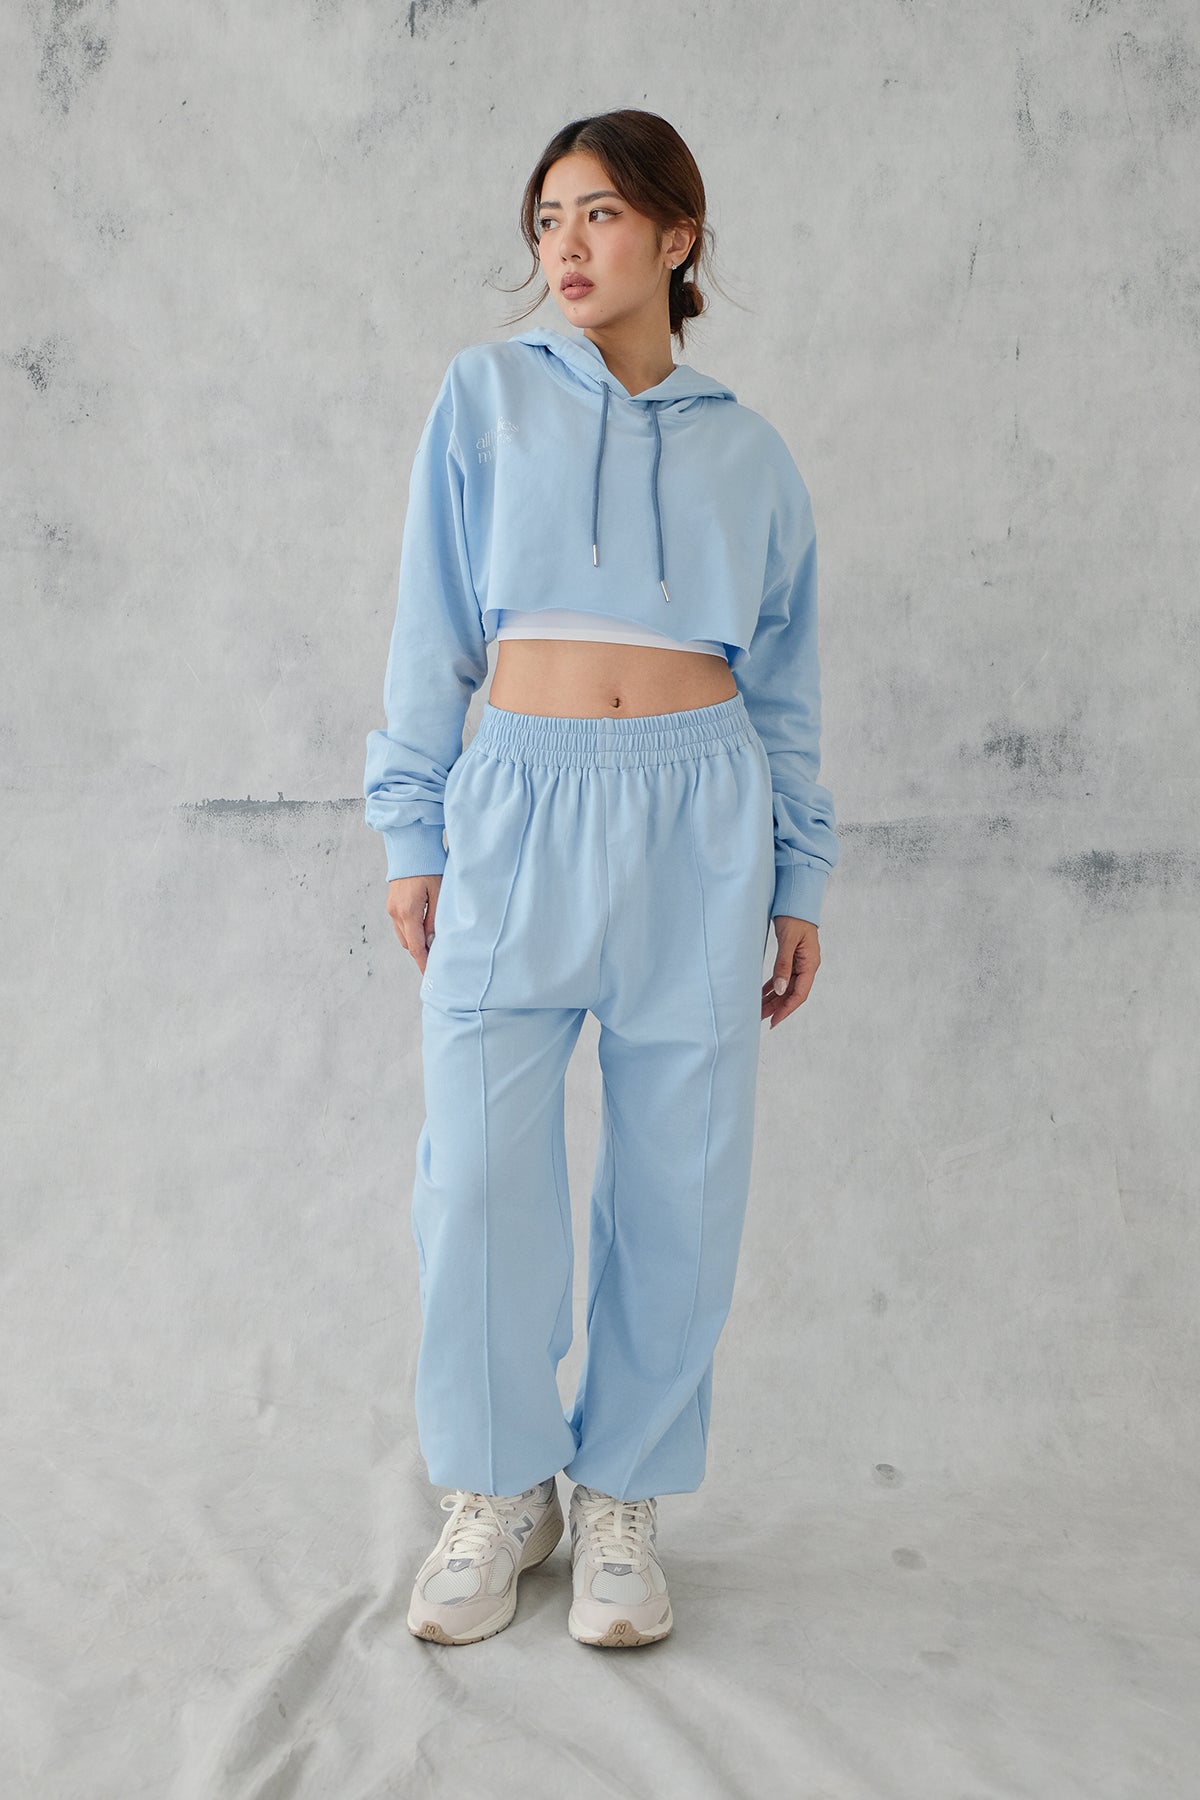 All Bodies Matter Jogger In Baby Blue